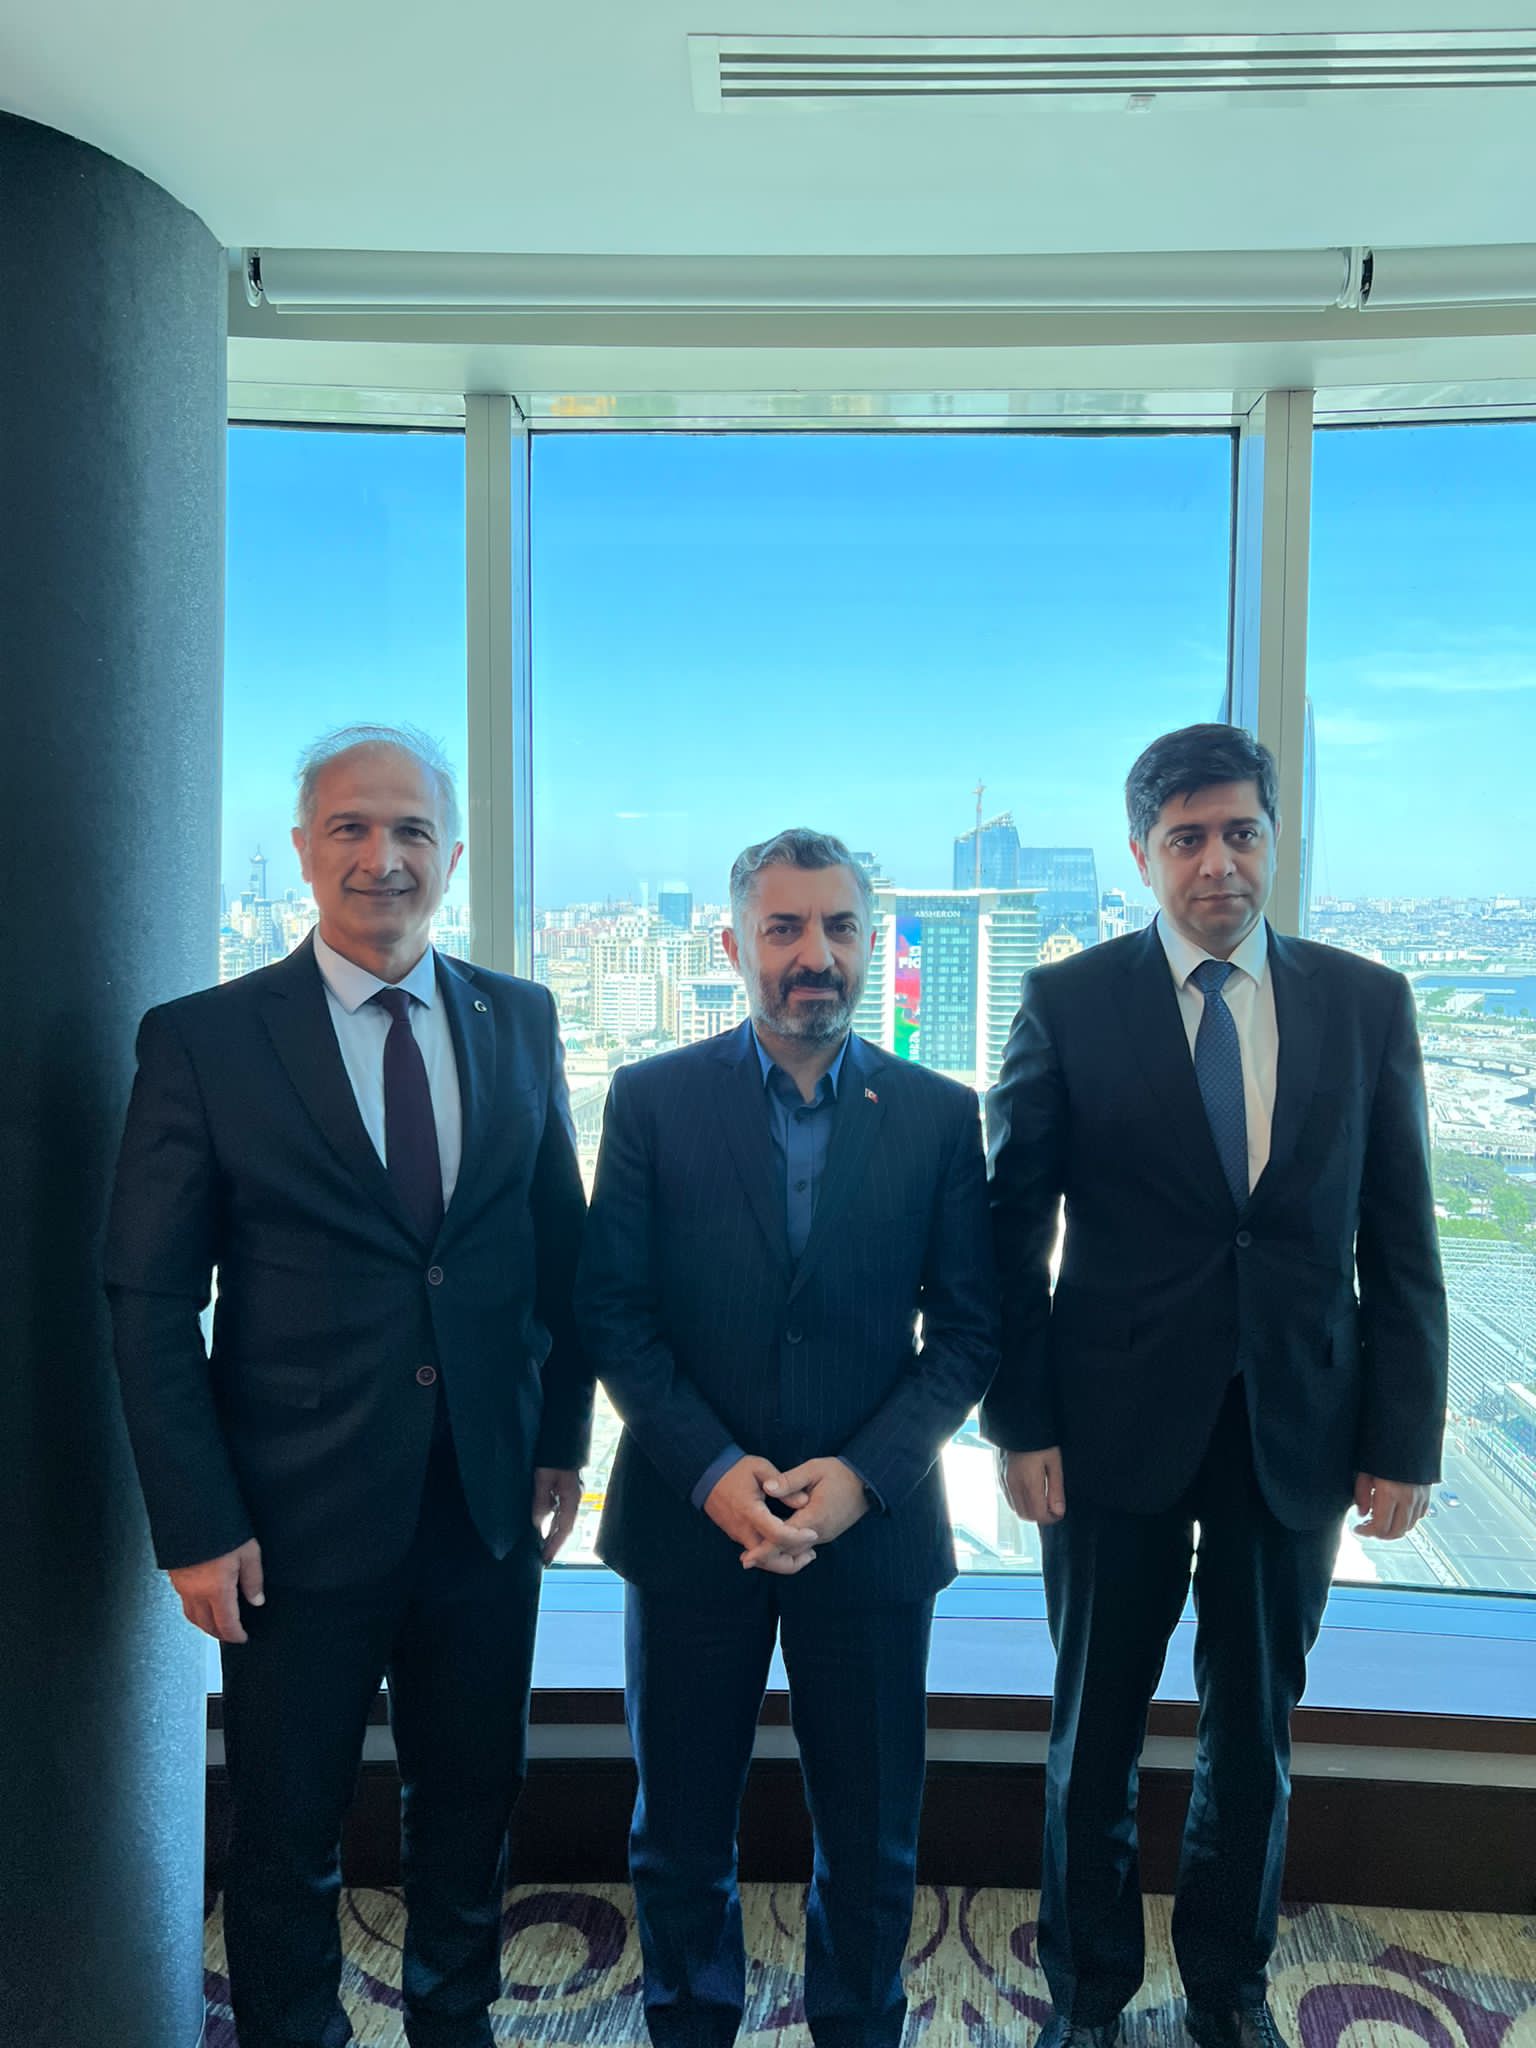 A meeting between the Chairman of the Audiovisual Council  of the Republic of Azerbaijan Ismat Sattarov and the President of the Radio and Television Supreme Council (RTÜK) Abubakr Shahin was held.